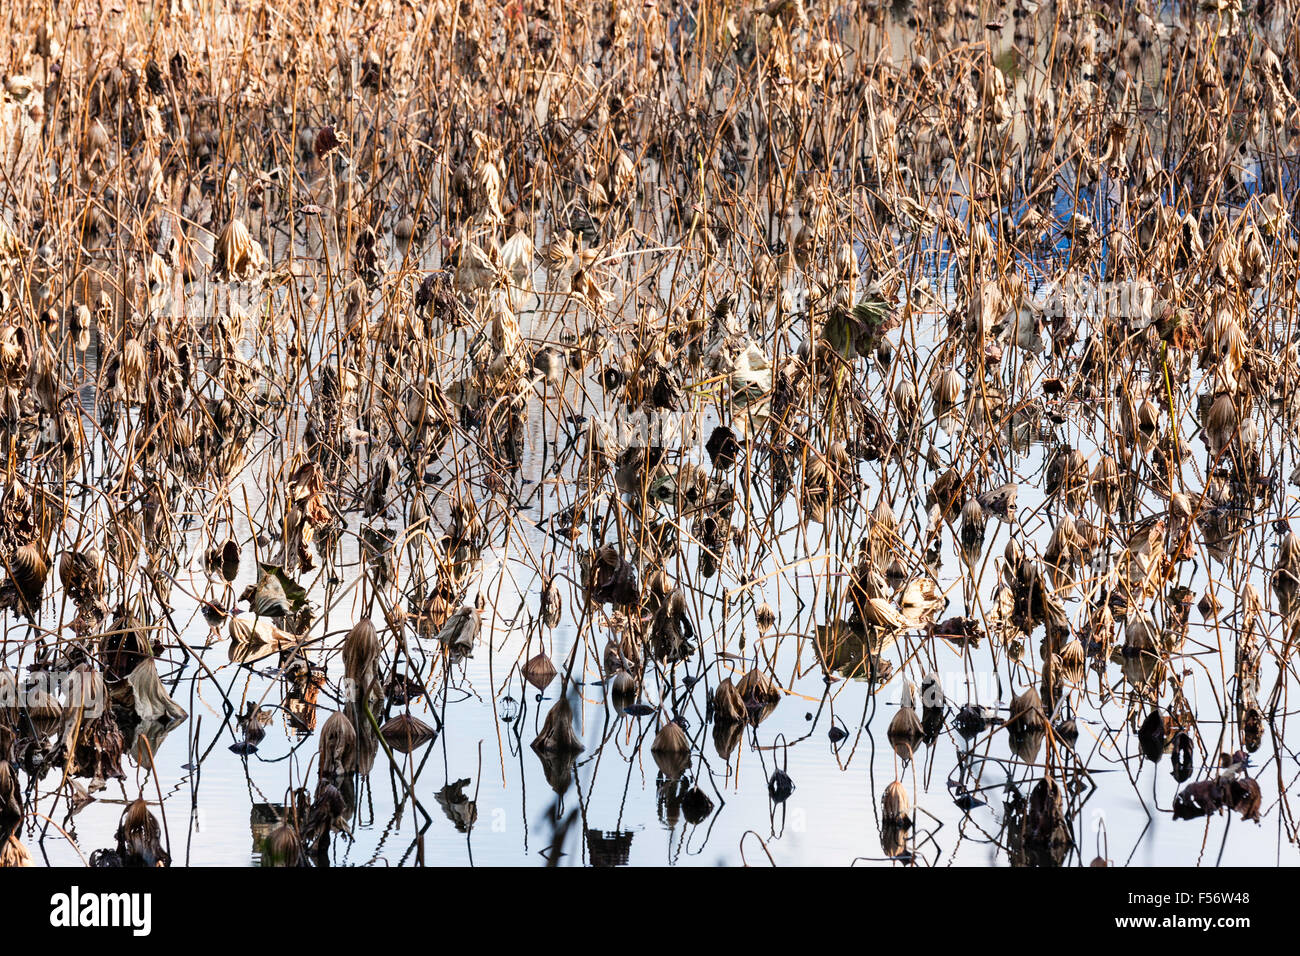 Japan, Genkyu-en, scenic beauty Japanese garden at Hikone castle. Dead brown water reeds standing up in pond with reflection, abstract pattern. Stock Photo